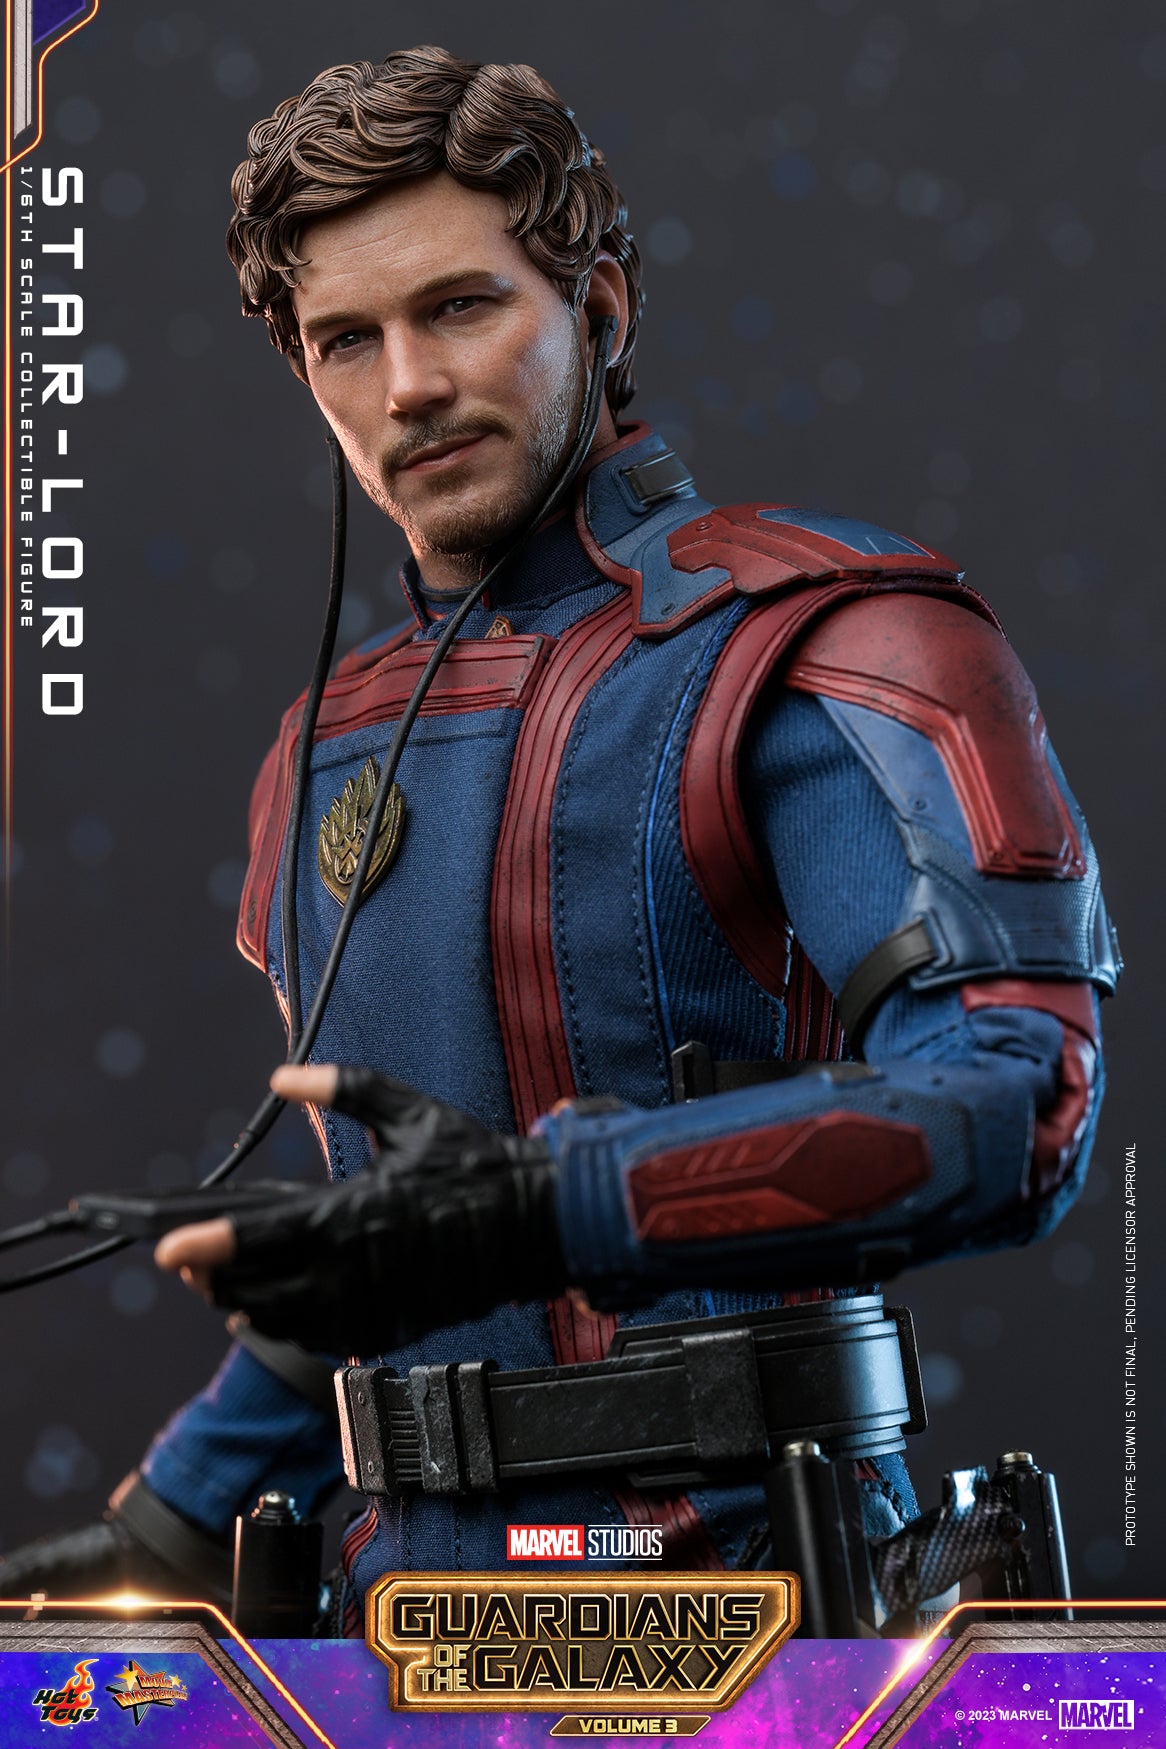 Hot Toys - MMS709 - Guardians of the Galaxy Vol. 3 - Star-Lord - Marvelous Toys